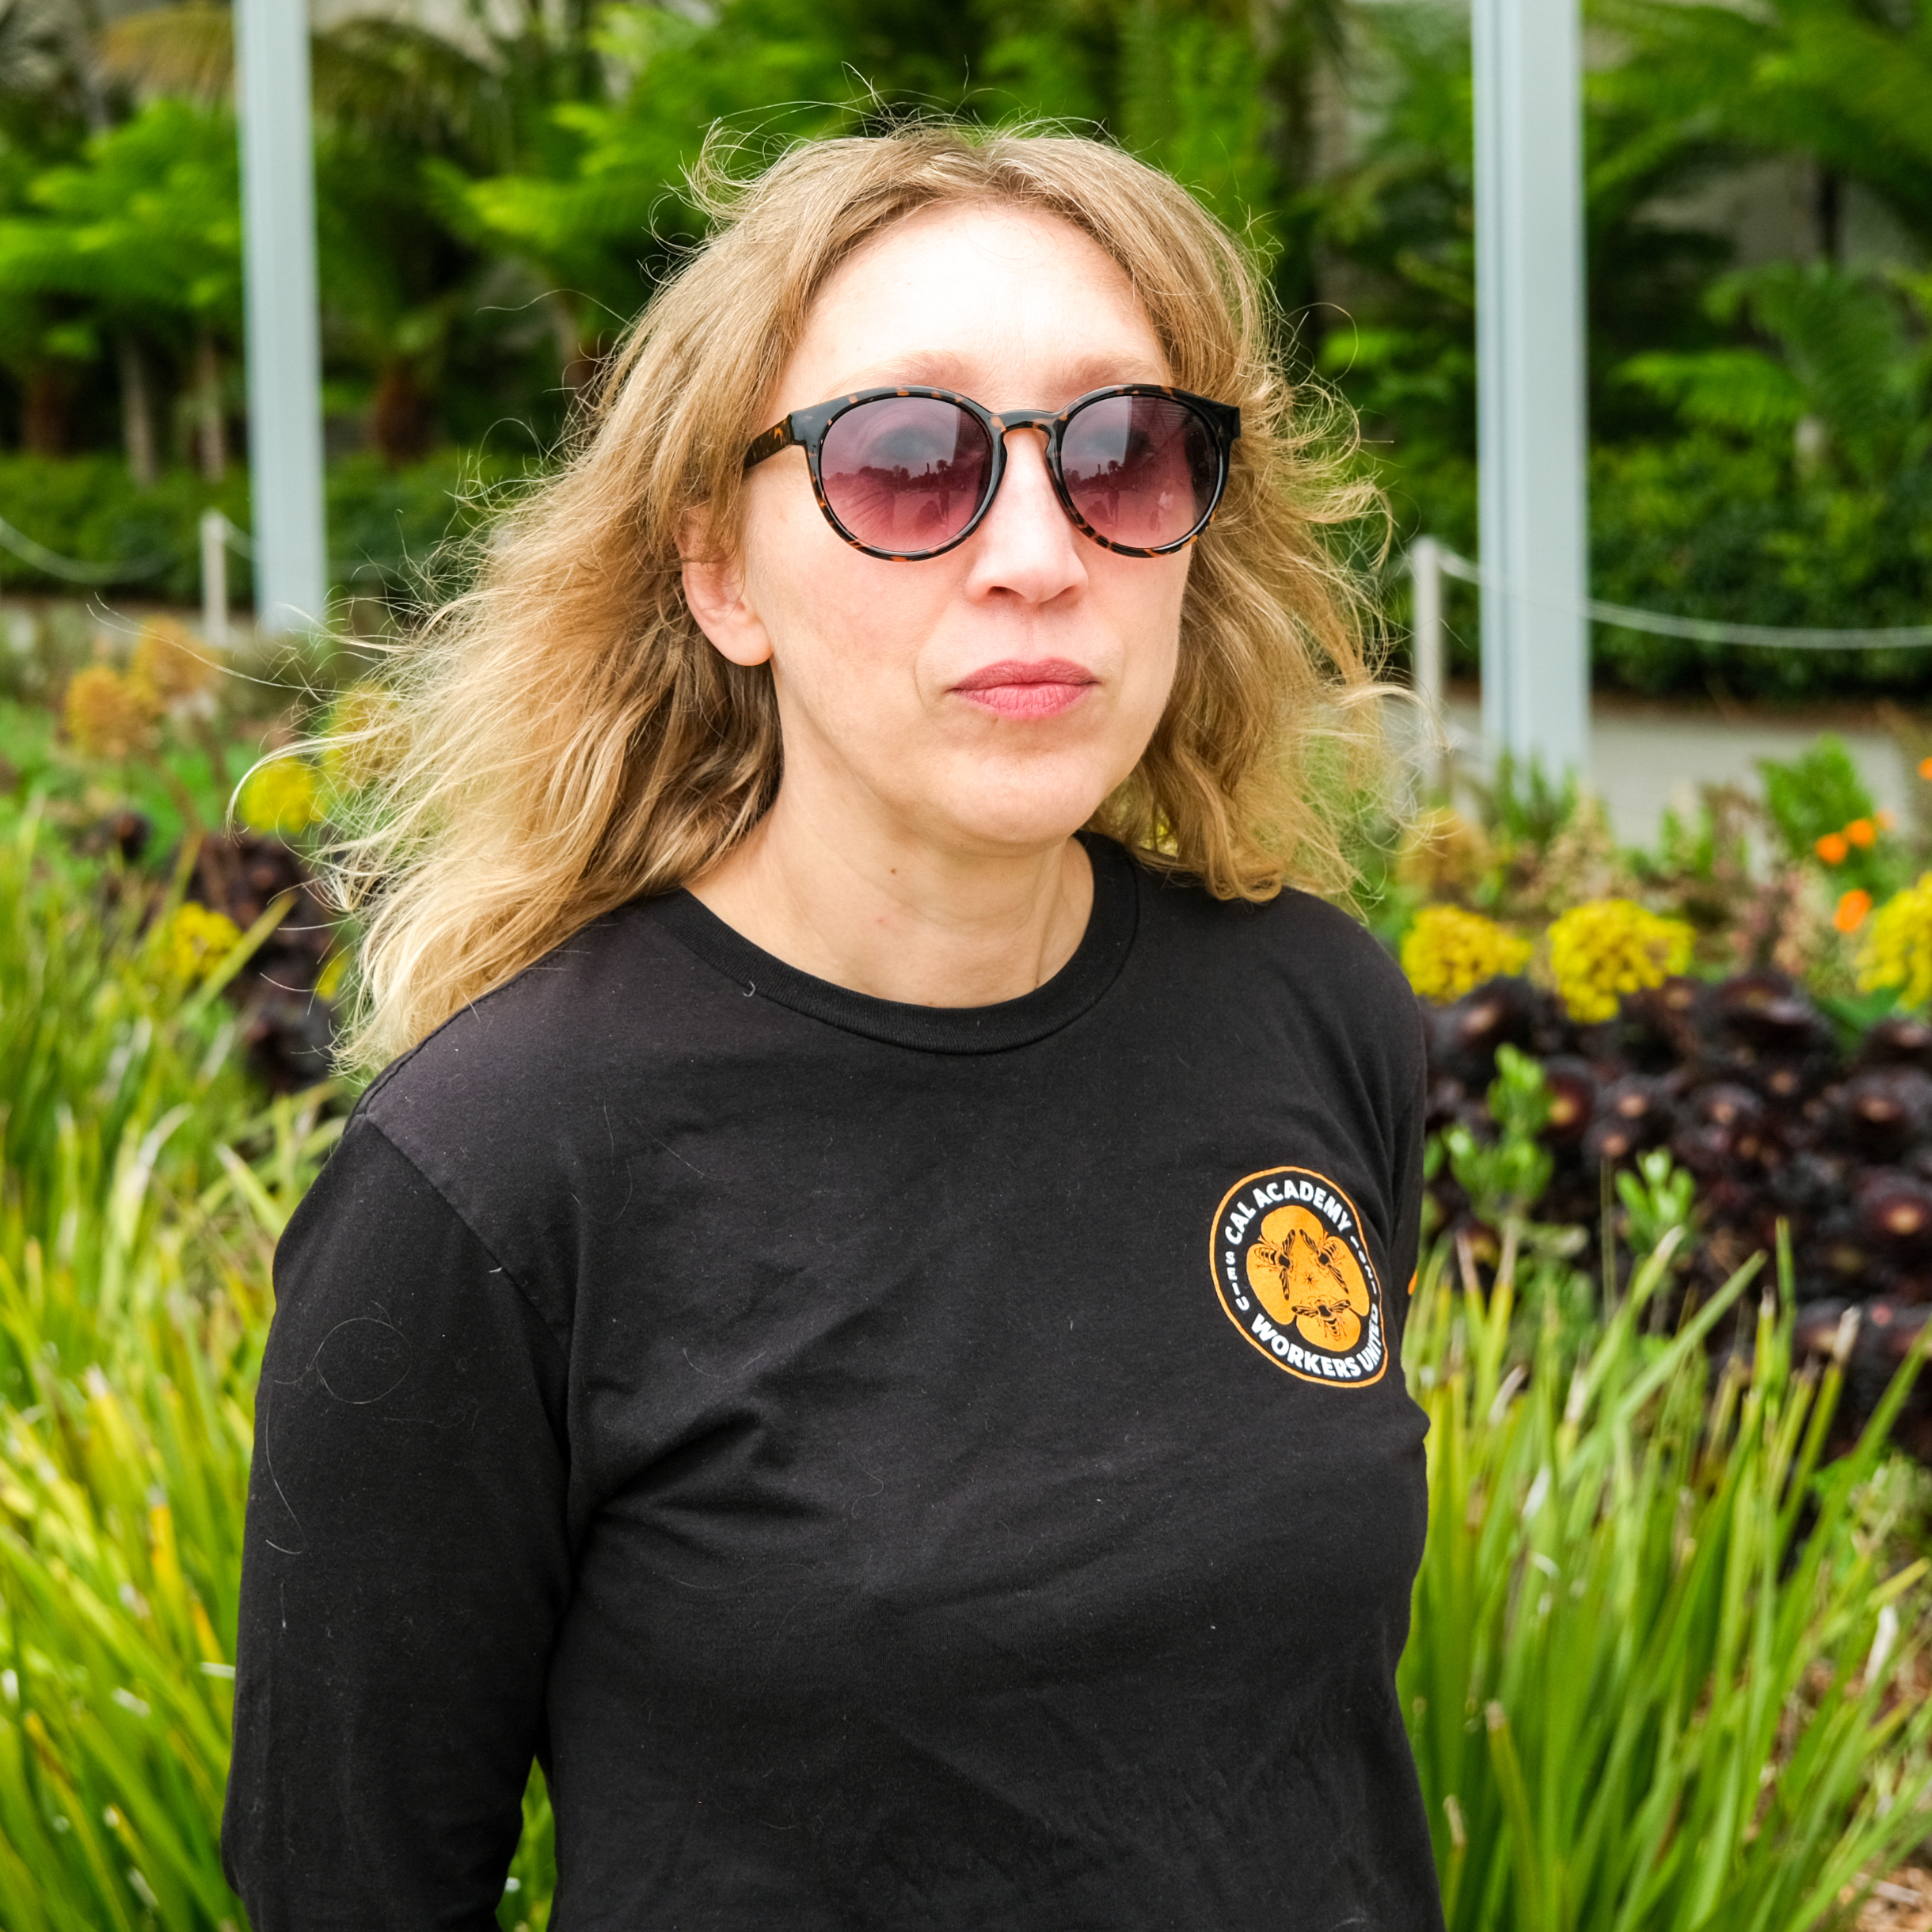 A woman in sunglasses and a black t-shirt stands in front of lush greenery, slightly glancing away from the camera.